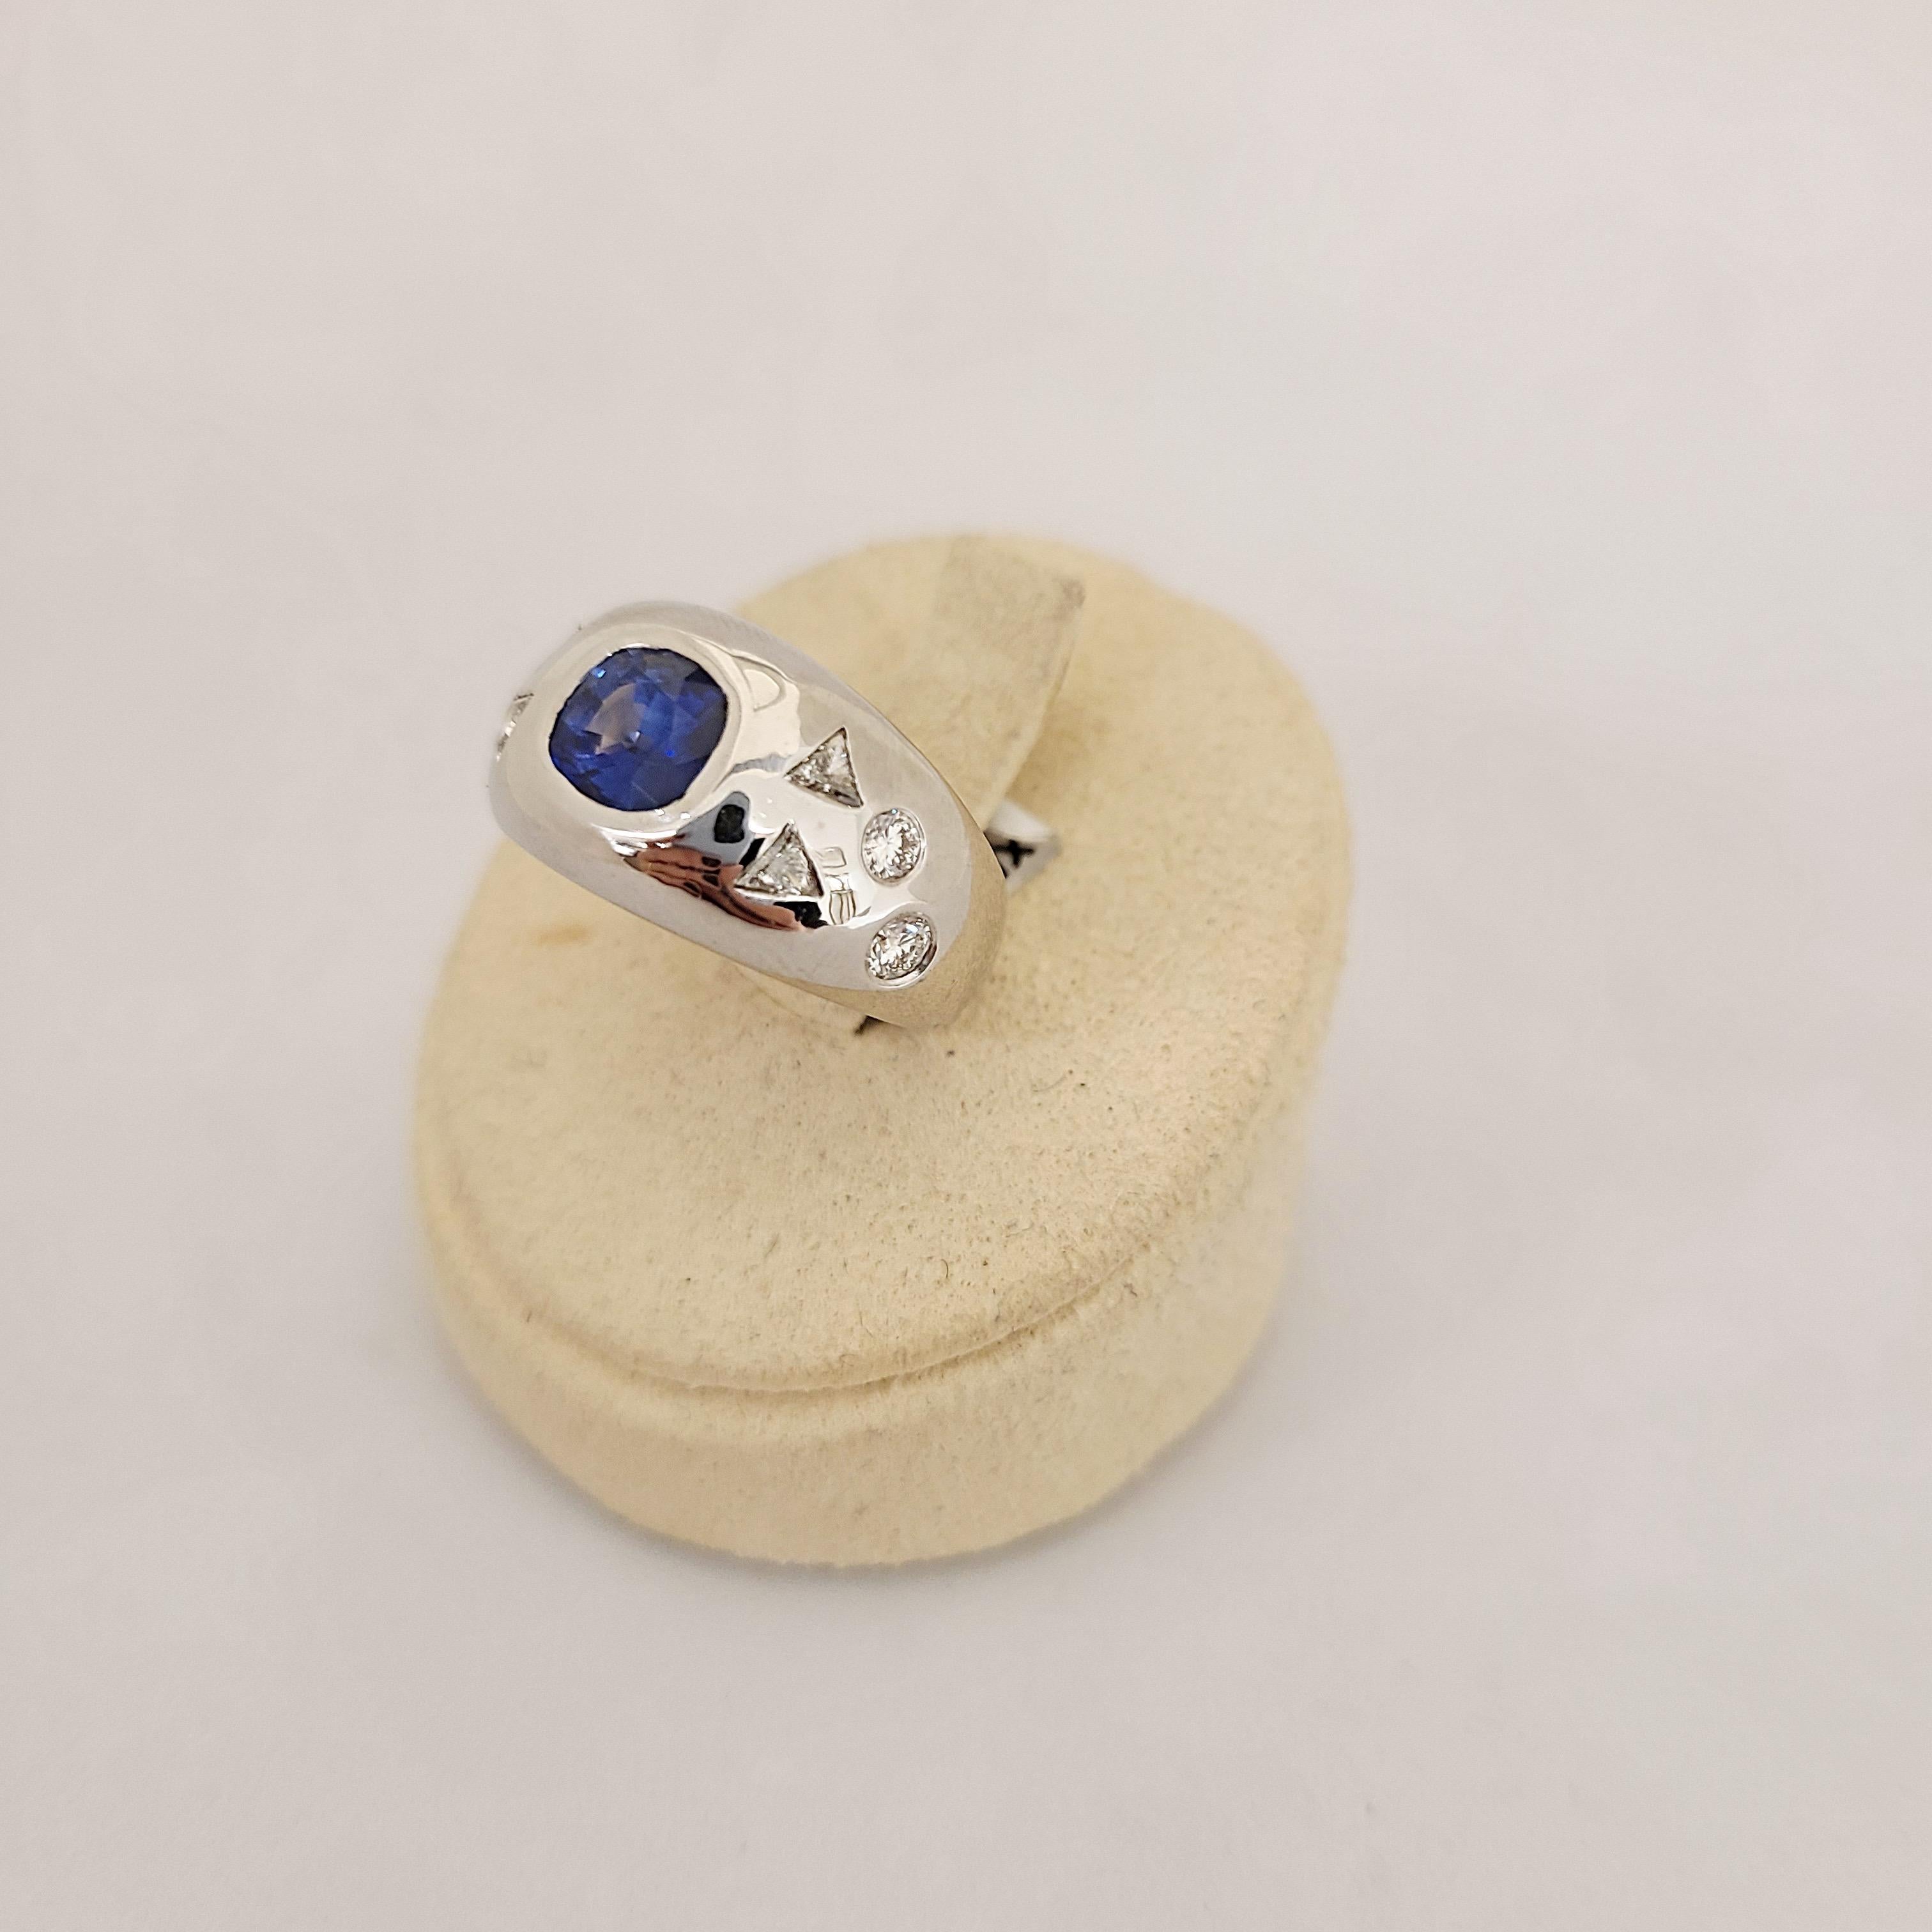 Made with superior quality, this show stopping white gold gypsy ring makes a fabulous right hand ring or unique wedding band. The cushion cut blue sapphire ring is 1.81cts and is flanked by 0.60 cts of round and trillion cut diamonds. Stones are